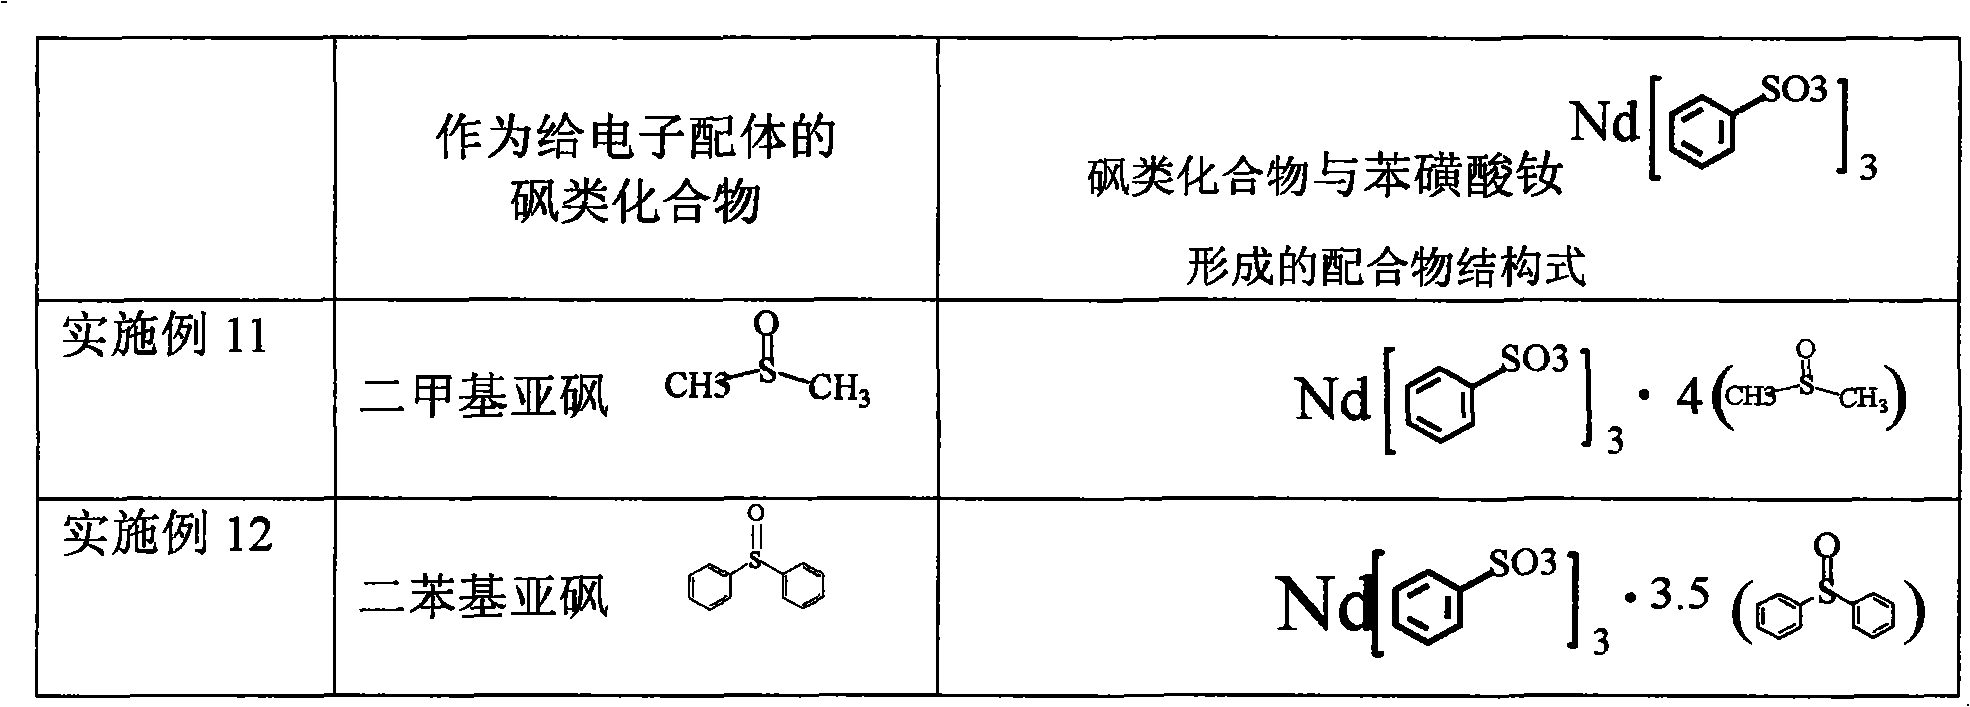 Sulfoacid rare earth catalyst for polymerizing high-cis-isoprene rubber and preparation method thereof